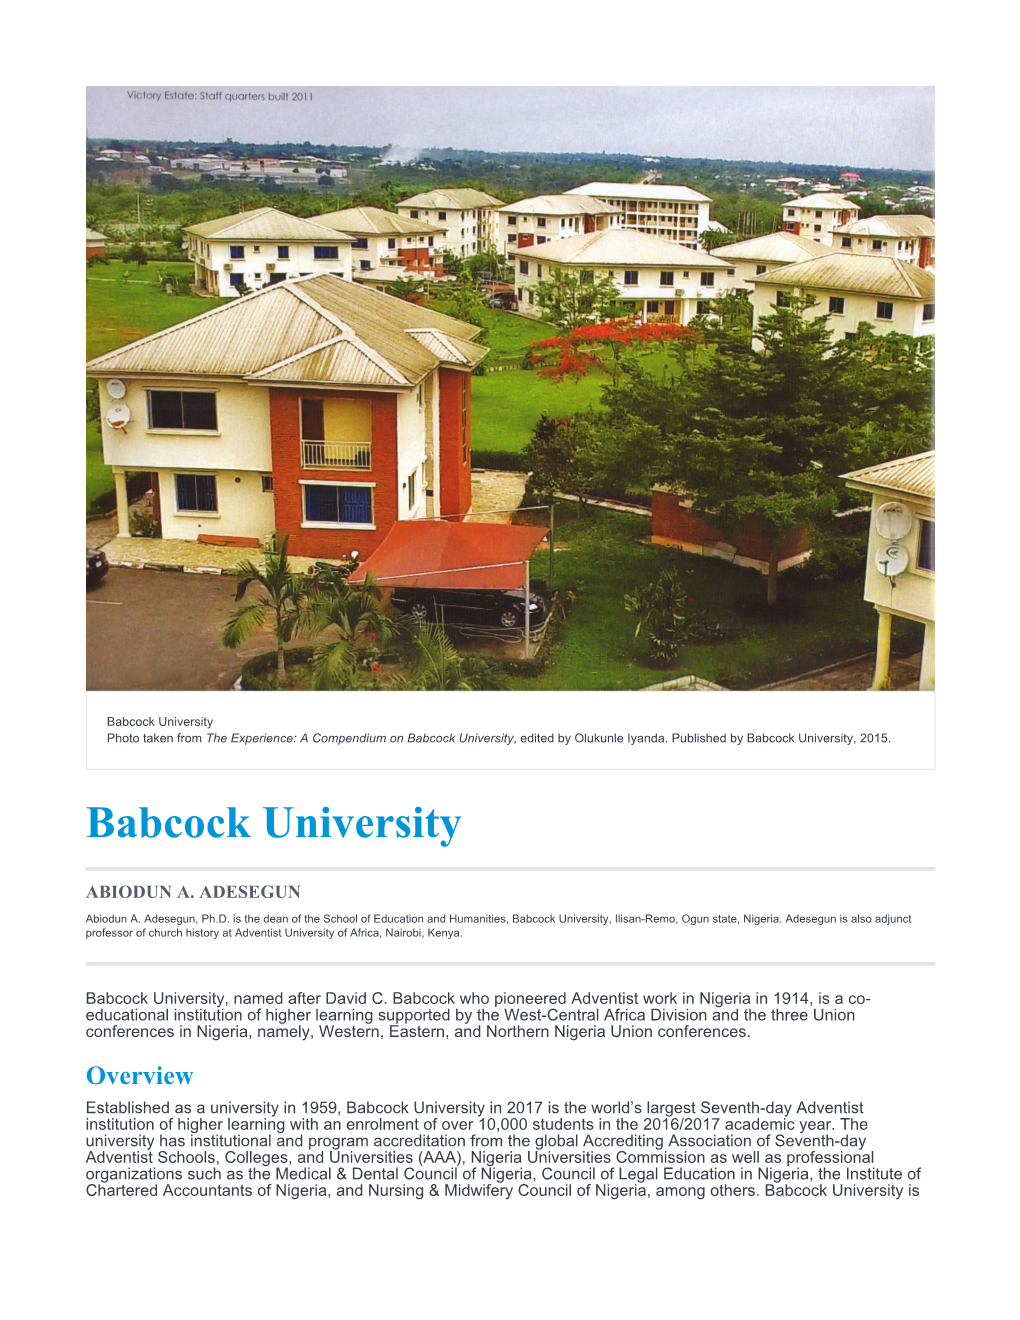 Babcock University Photo Taken from the Experience: a Compendium on Babcock University, Edited by Olukunle Iyanda